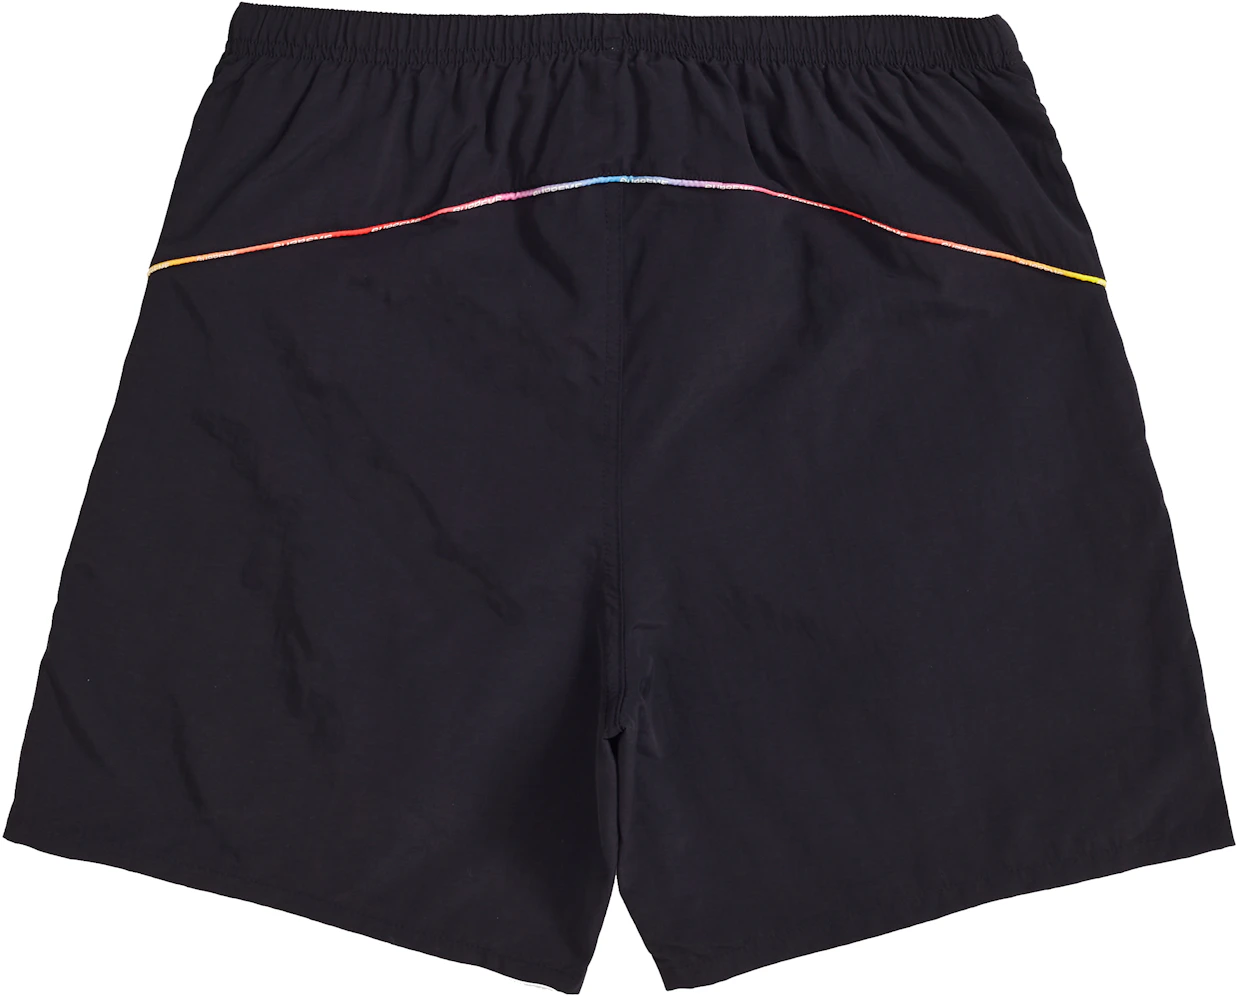 https://images.stockx.com/images/Supreme-Gradient-Piping-Water-Short-Black-2.jpg?fit=fill&bg=FFFFFF&w=700&h=500&fm=webp&auto=compress&q=90&dpr=2&trim=color&updated_at=1624552360?height=78&width=78